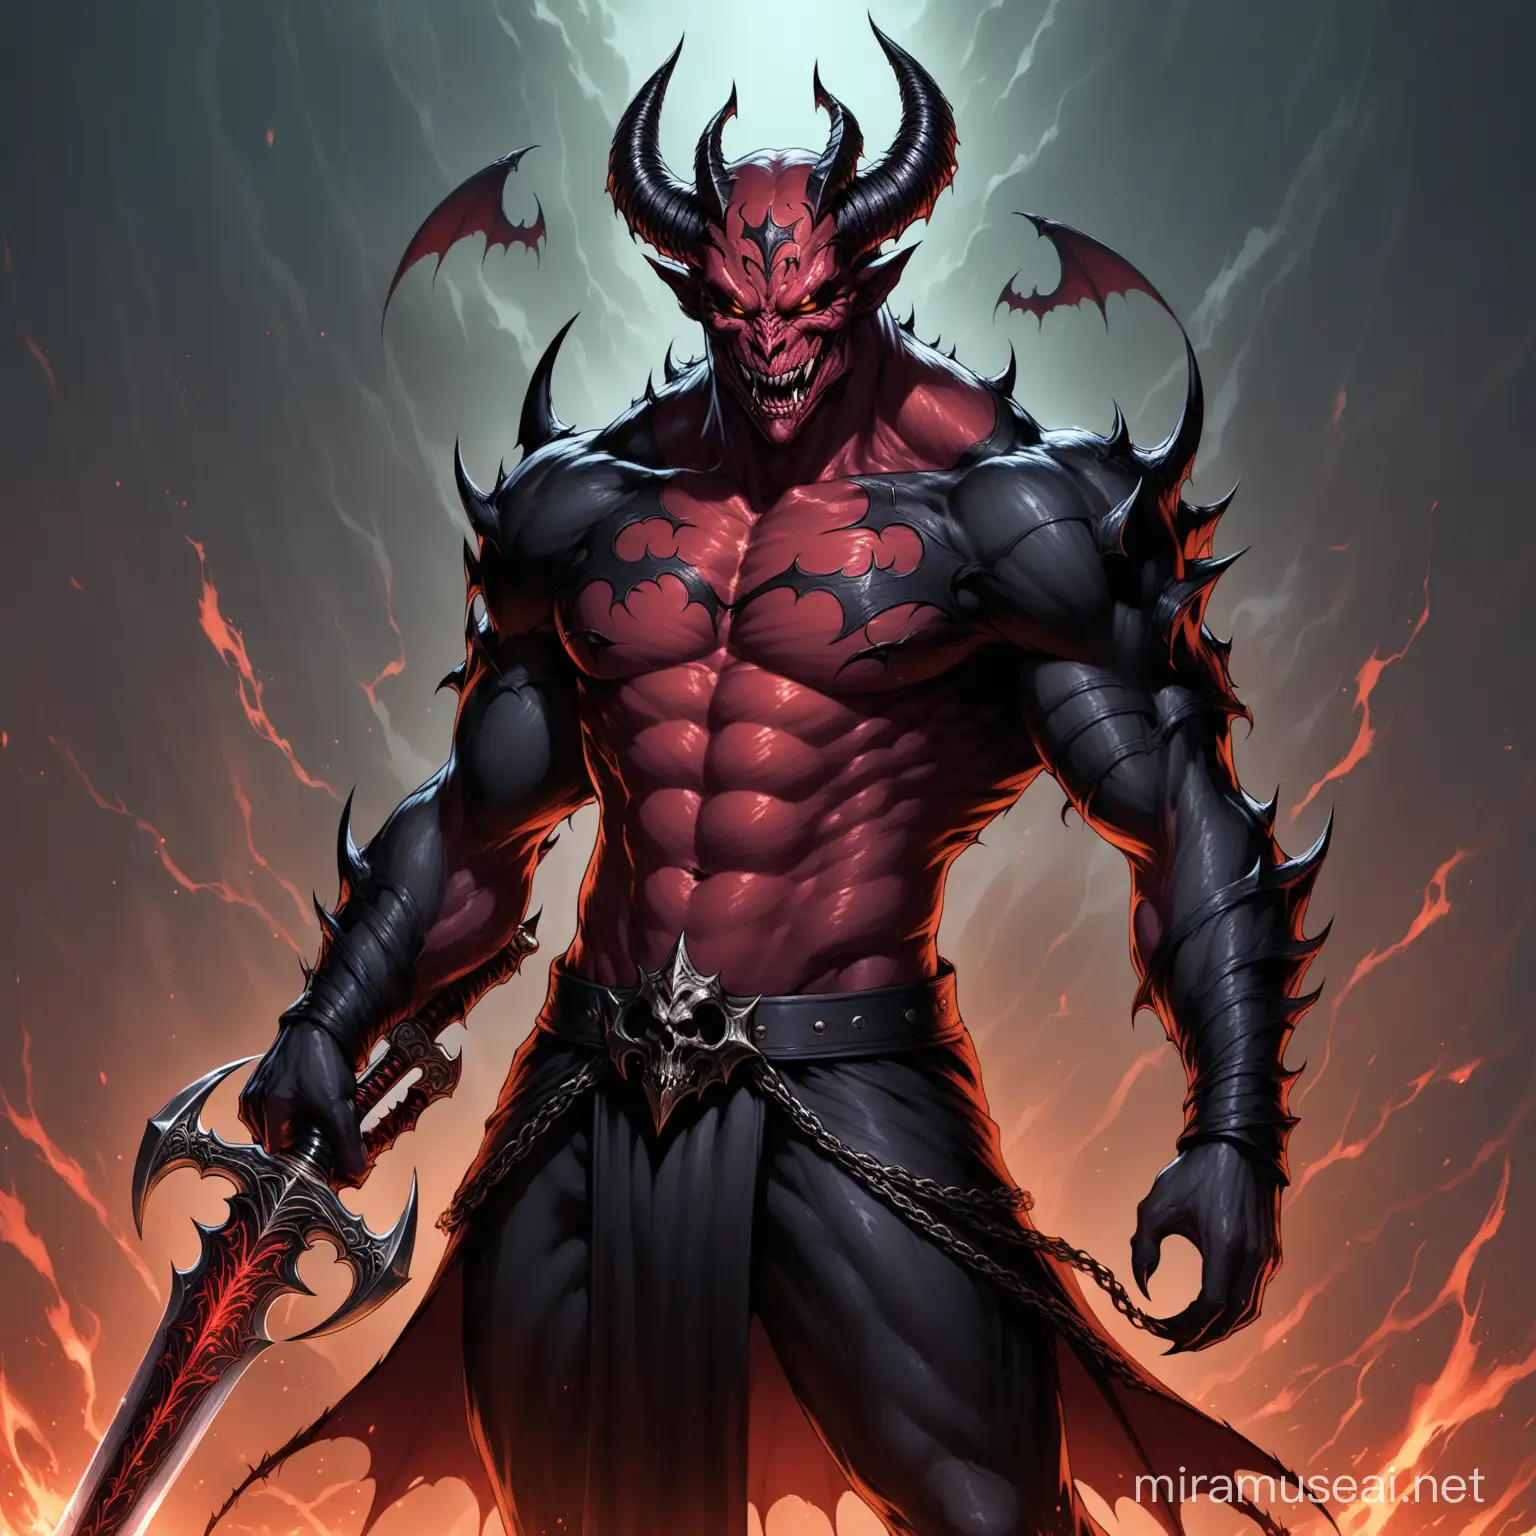 Powerful Demon Warrior with Sword in High Definition Detail